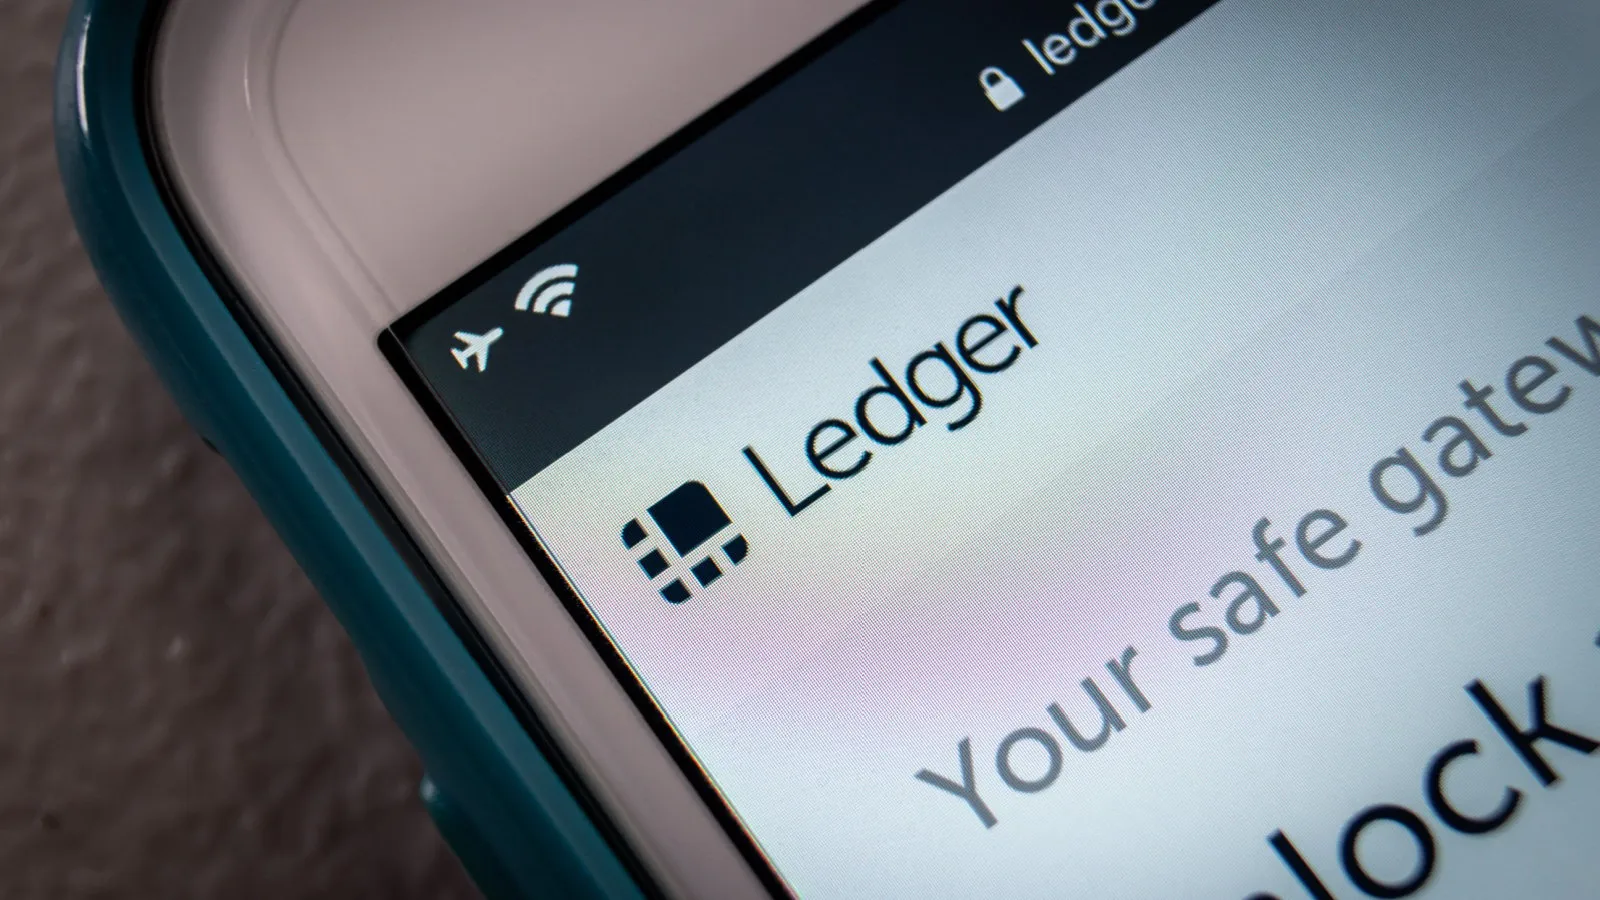 Ledger, Coinbase Pay Integrate to Give Users Direct Access to Buy, Sell Crypto